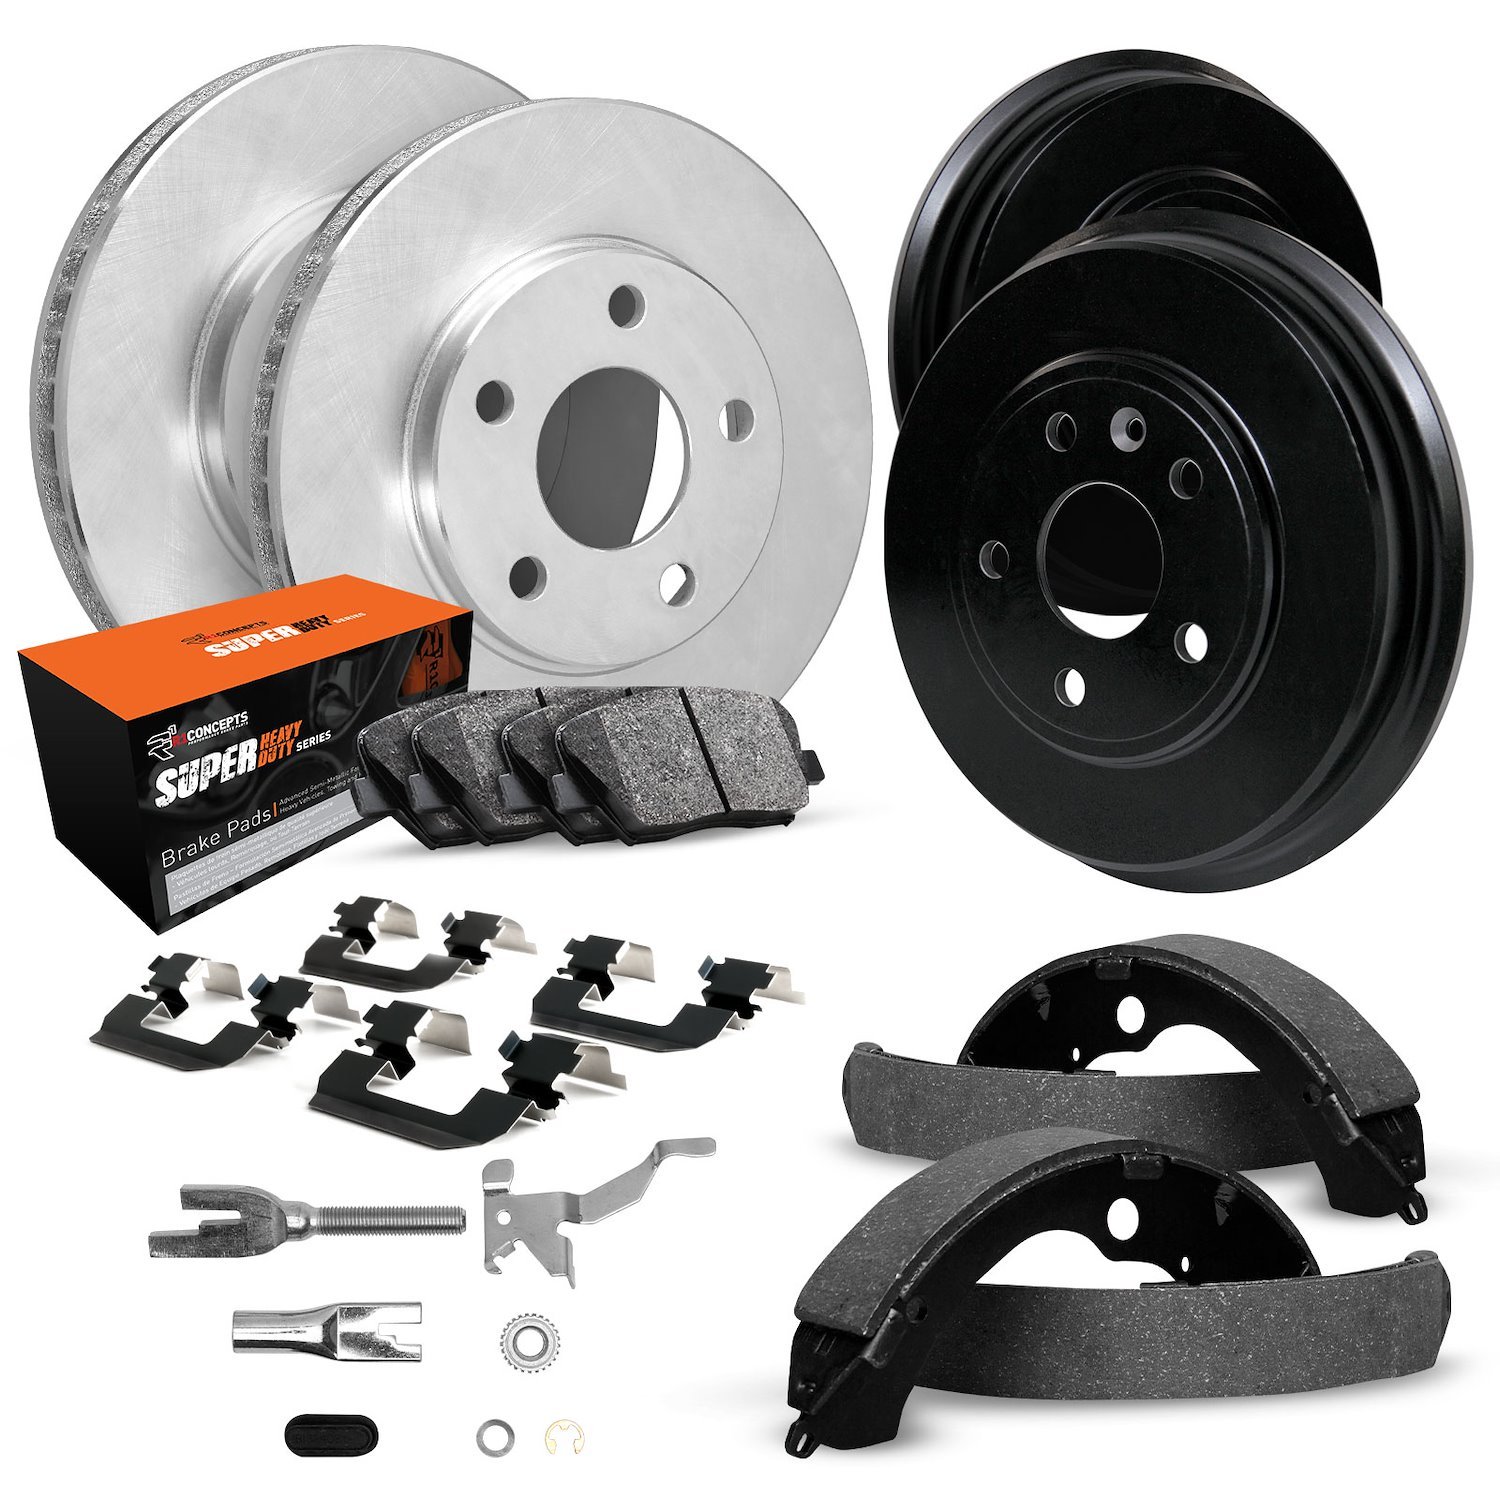 E-Line Blank Brake Rotor & Drum Set w/Super-Duty Pads, Shoes, Hardware, & Adjusters, 1975-1977 GM, Position: Front & Rear